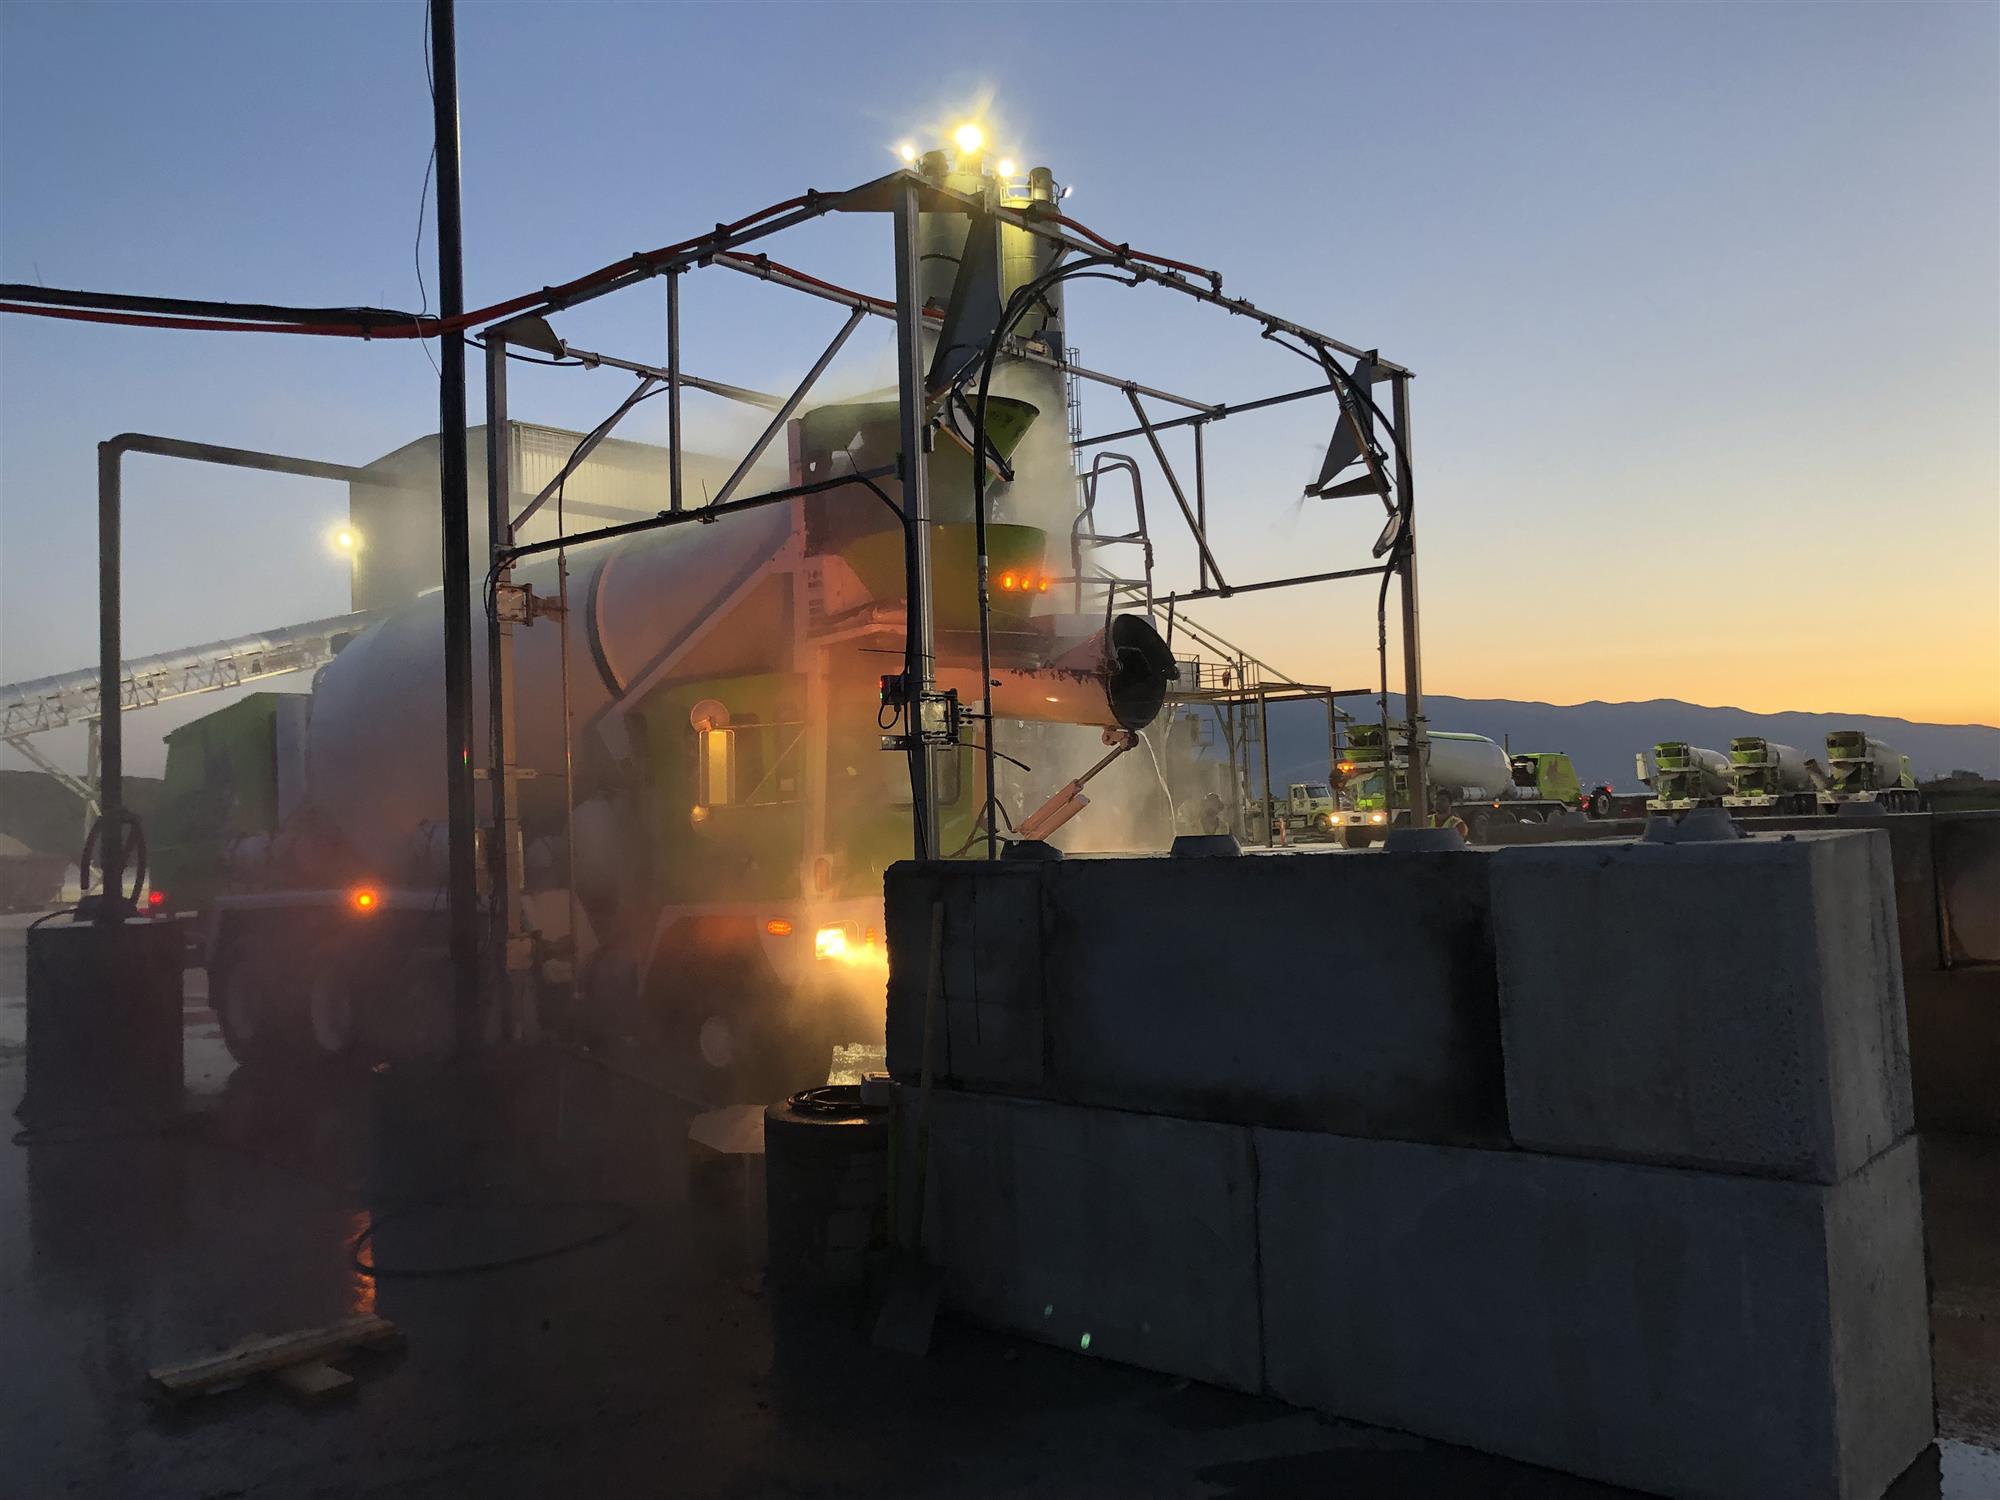 Sioux truck wash cleaning concrete trucks at dawn